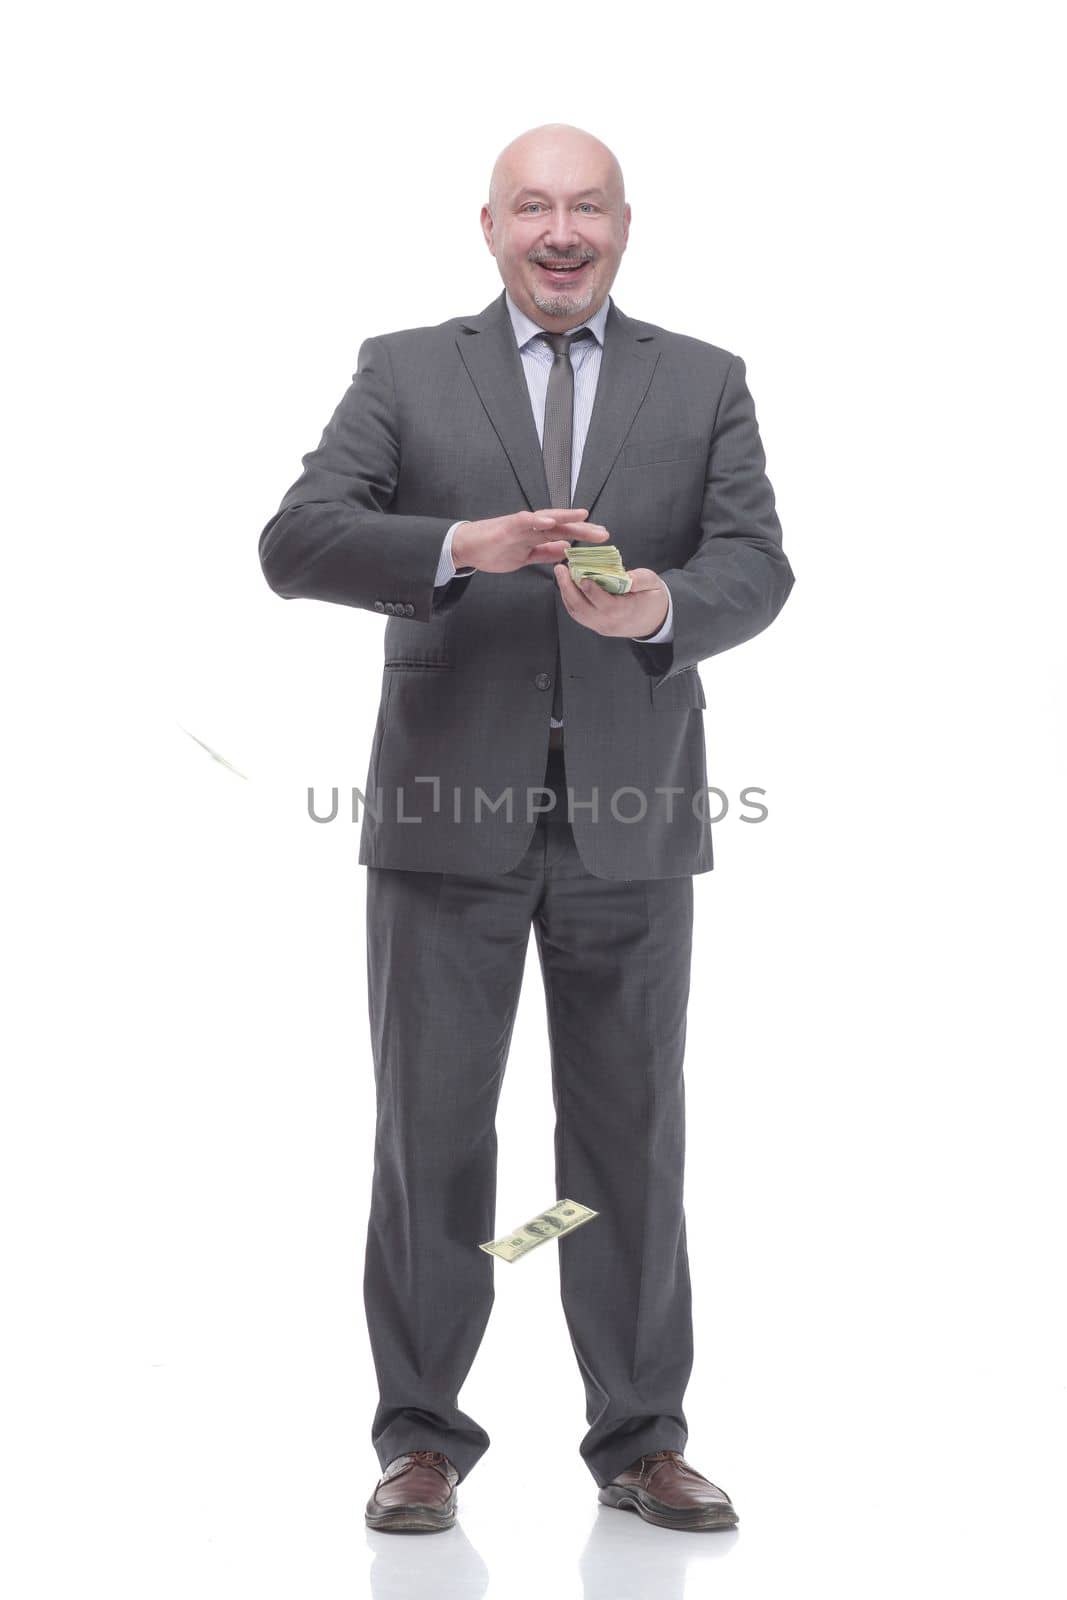 in full growth. smiling business man with dollar bills.isolated on a white background.